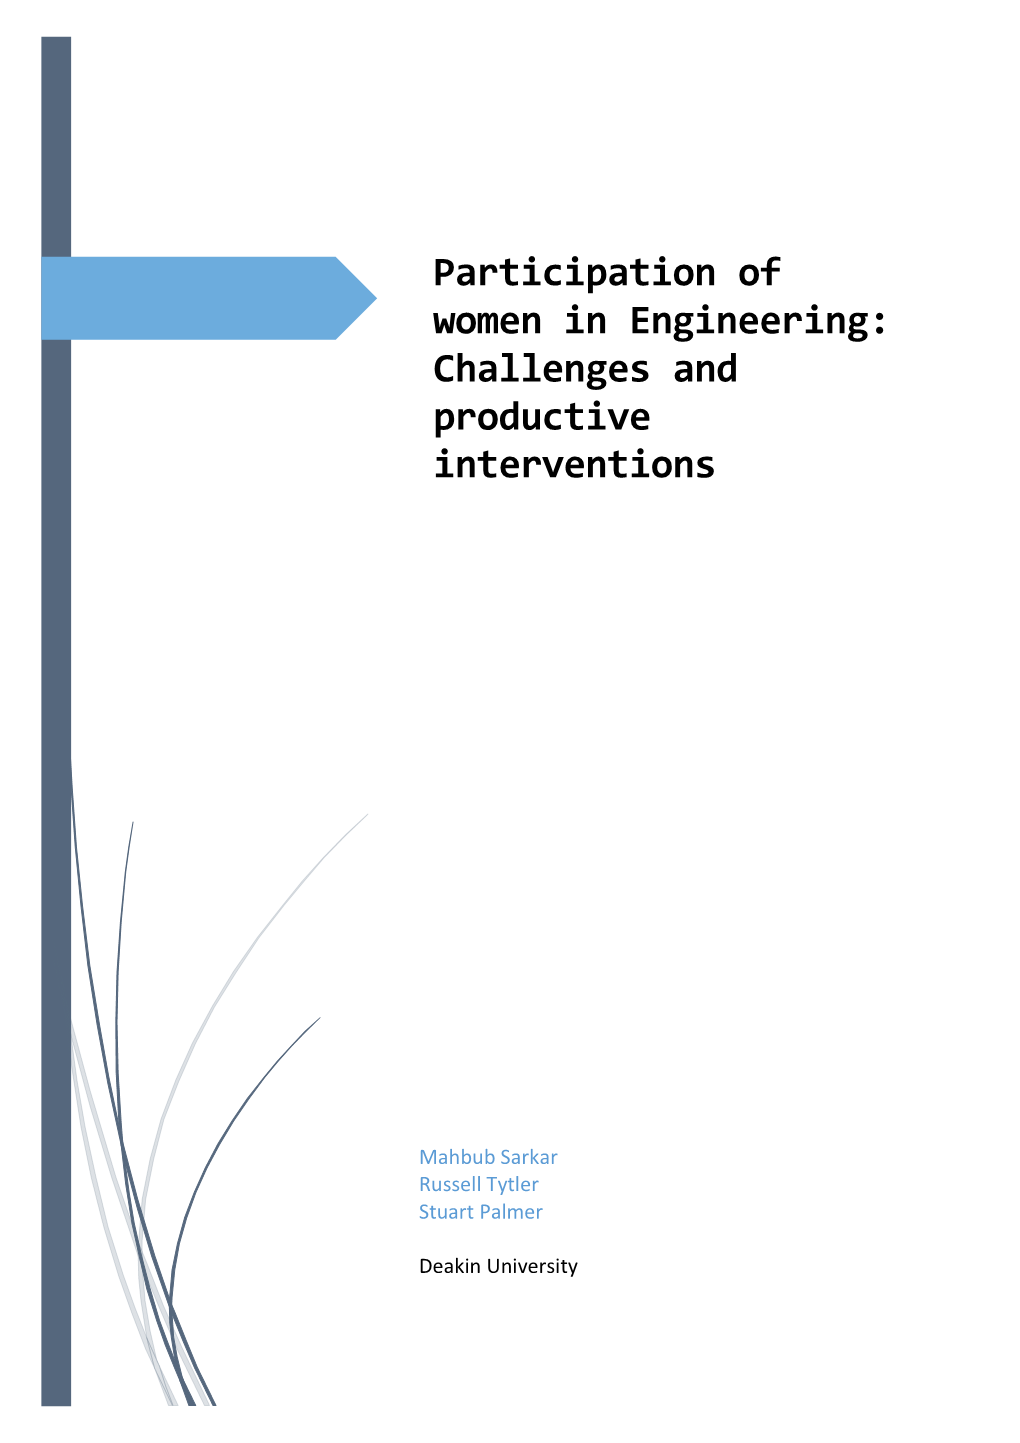 Participation of Women in Engineering: Challenges and Productive